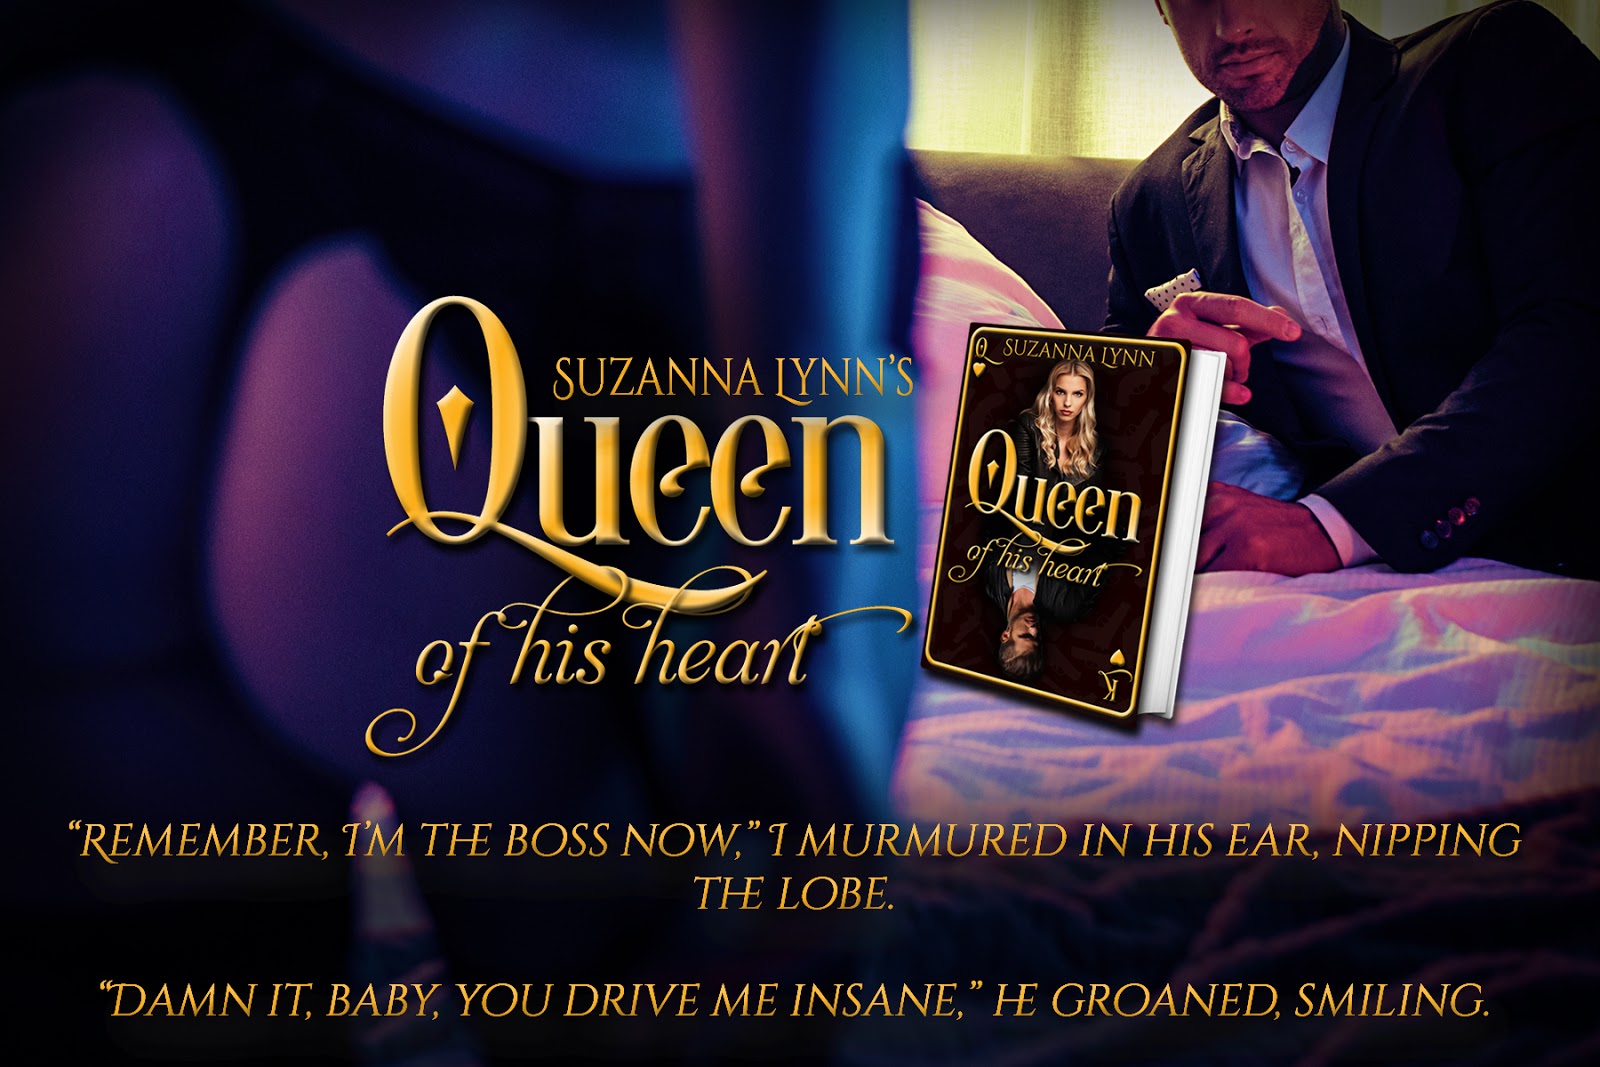 Queen of His Heart Release Blitz with Suzanna Lynn.